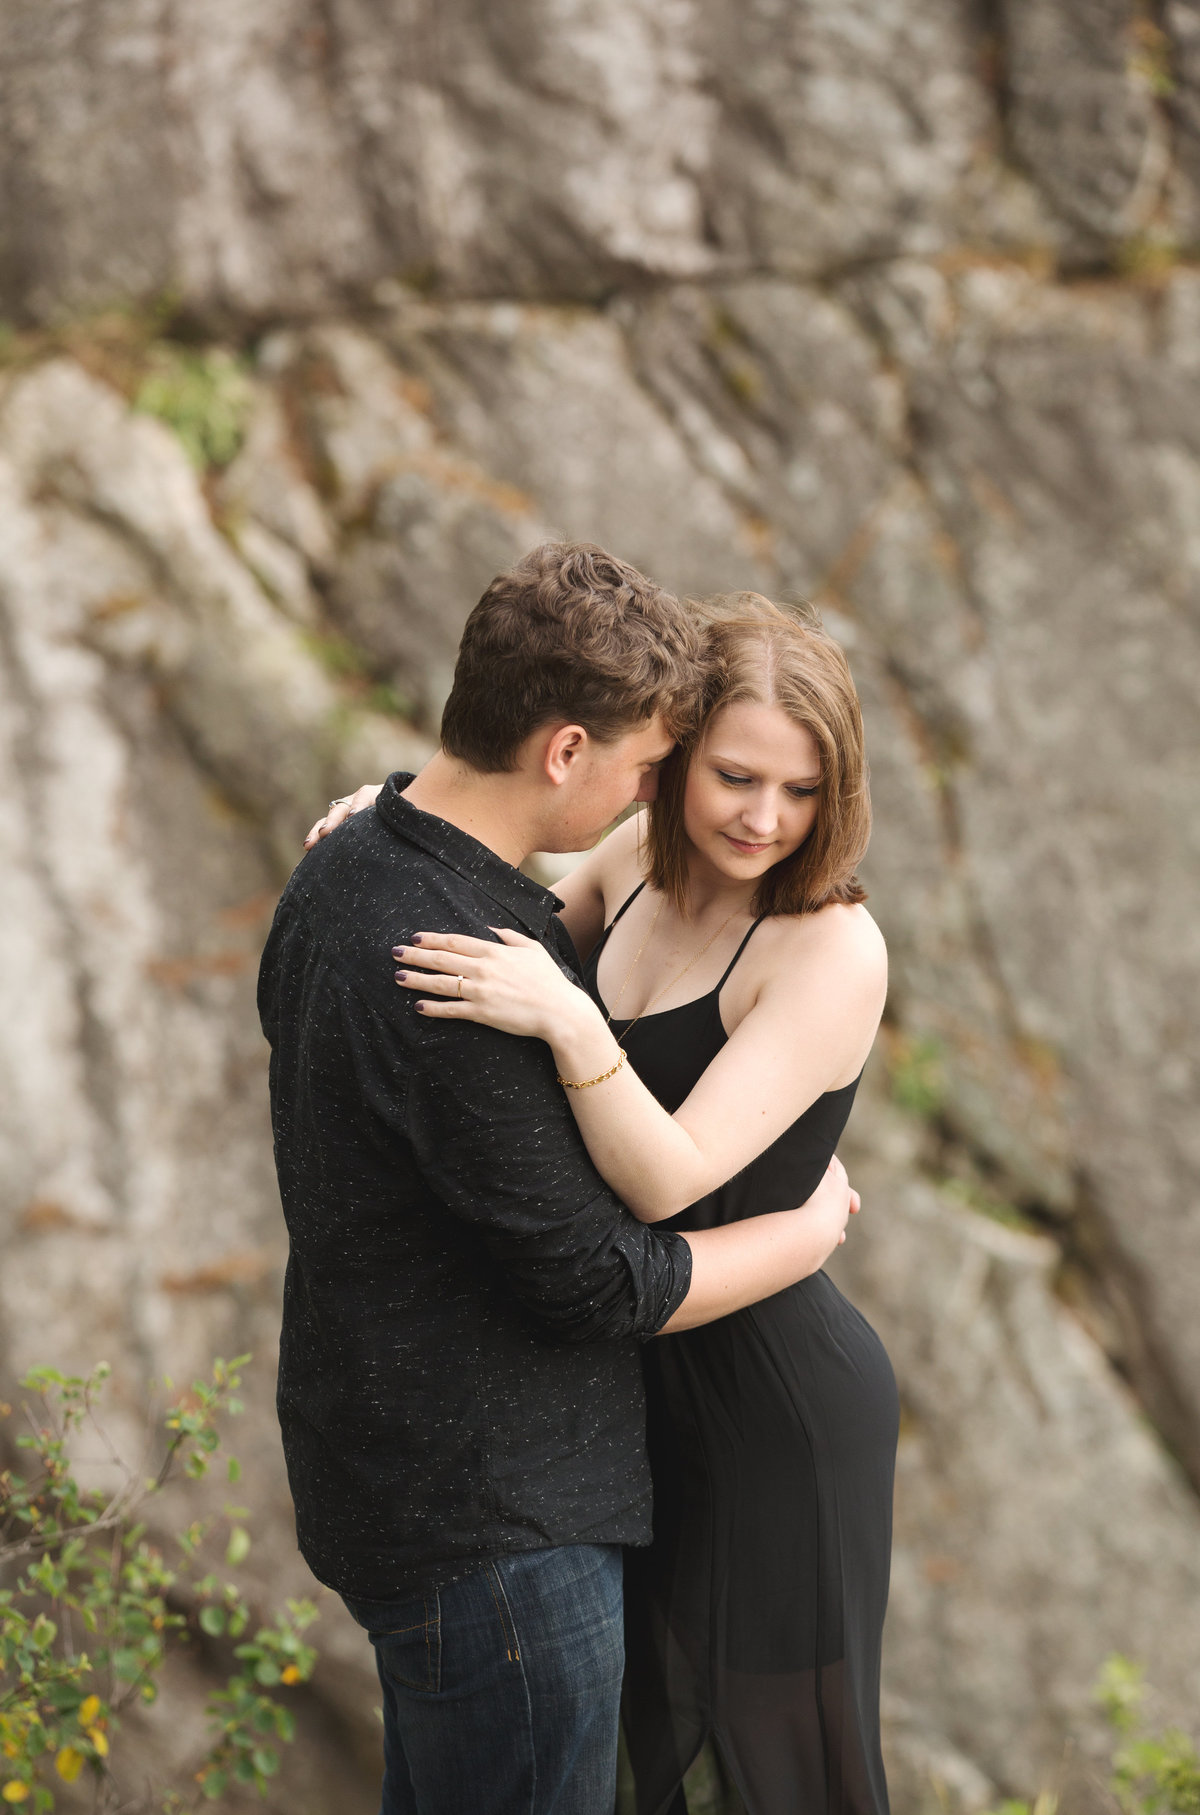 Tanessa and isaiah-Engagement-0010